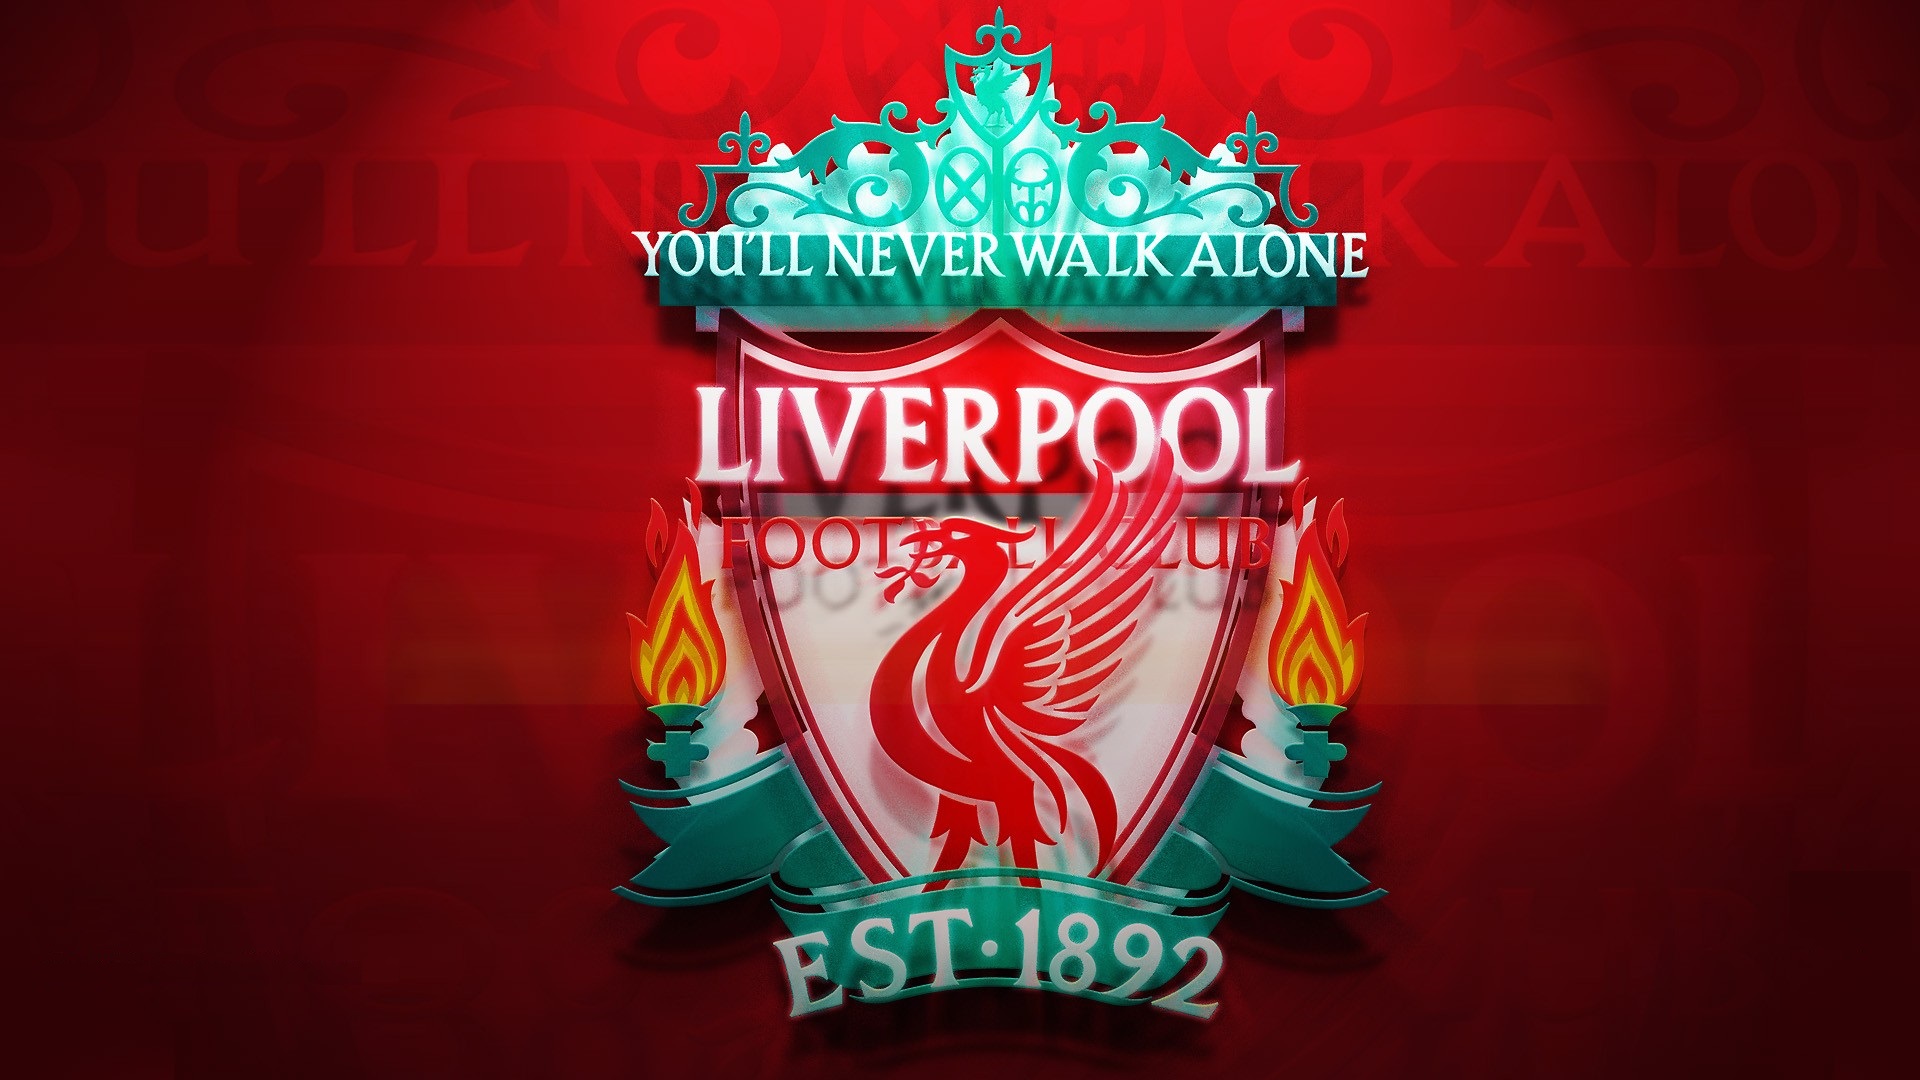 Wallpapers HD Liverpool with resolution 1920x1080 pixel. You can make this wallpaper for your Mac or Windows Desktop Background, iPhone, Android or Tablet and another Smartphone device